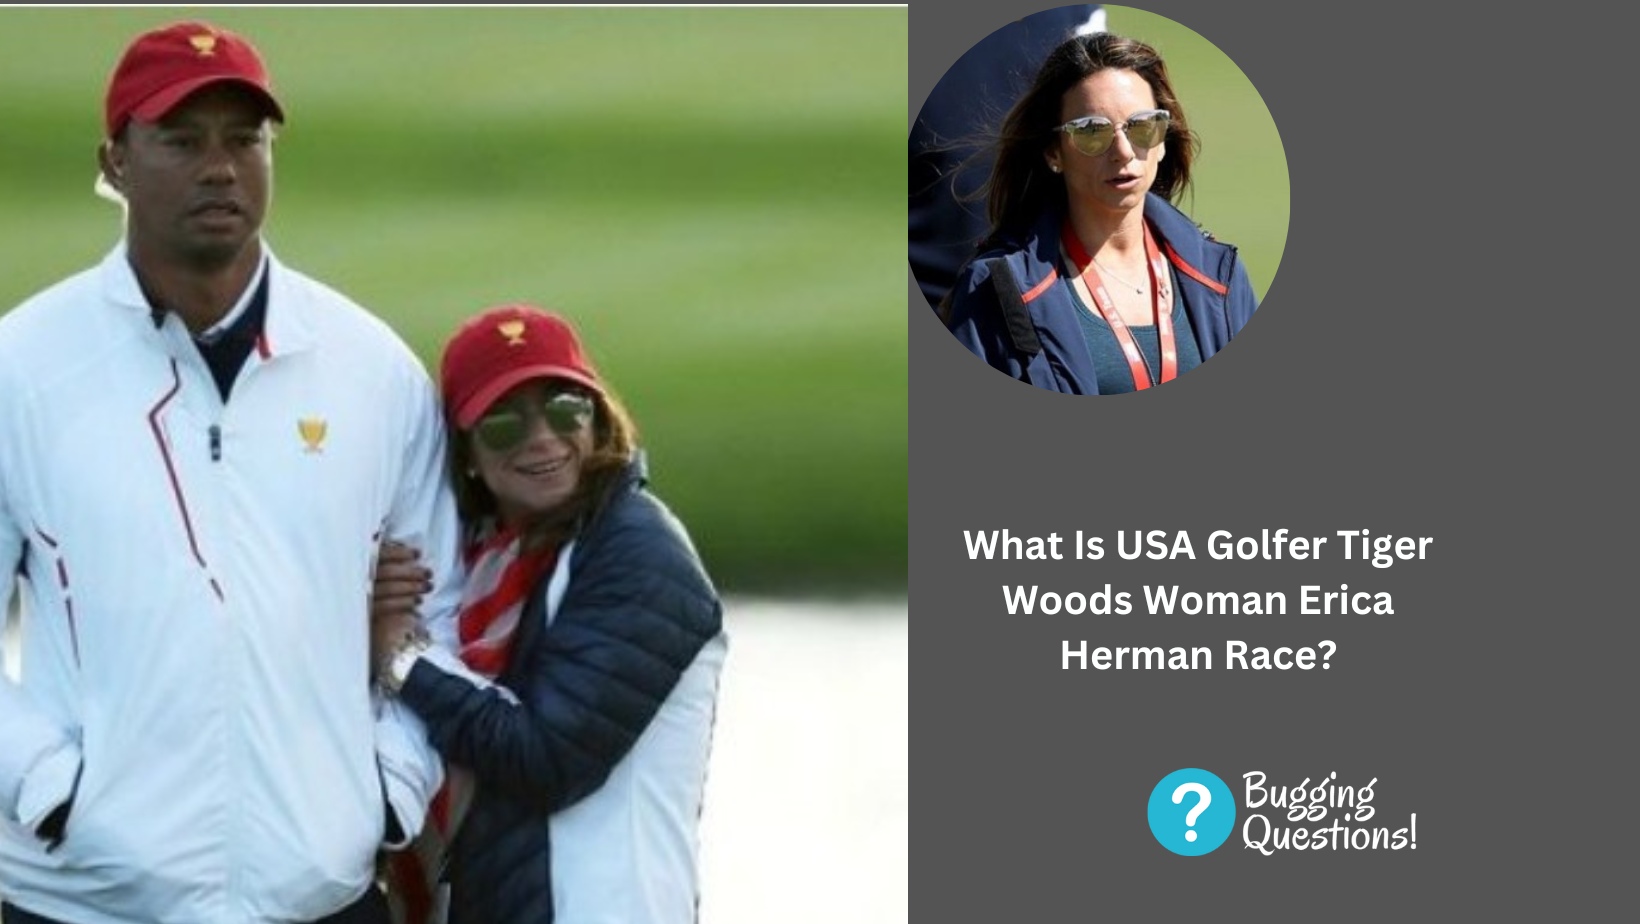 What Is USA Golfer Tiger Woods Woman Erica Herman Race?